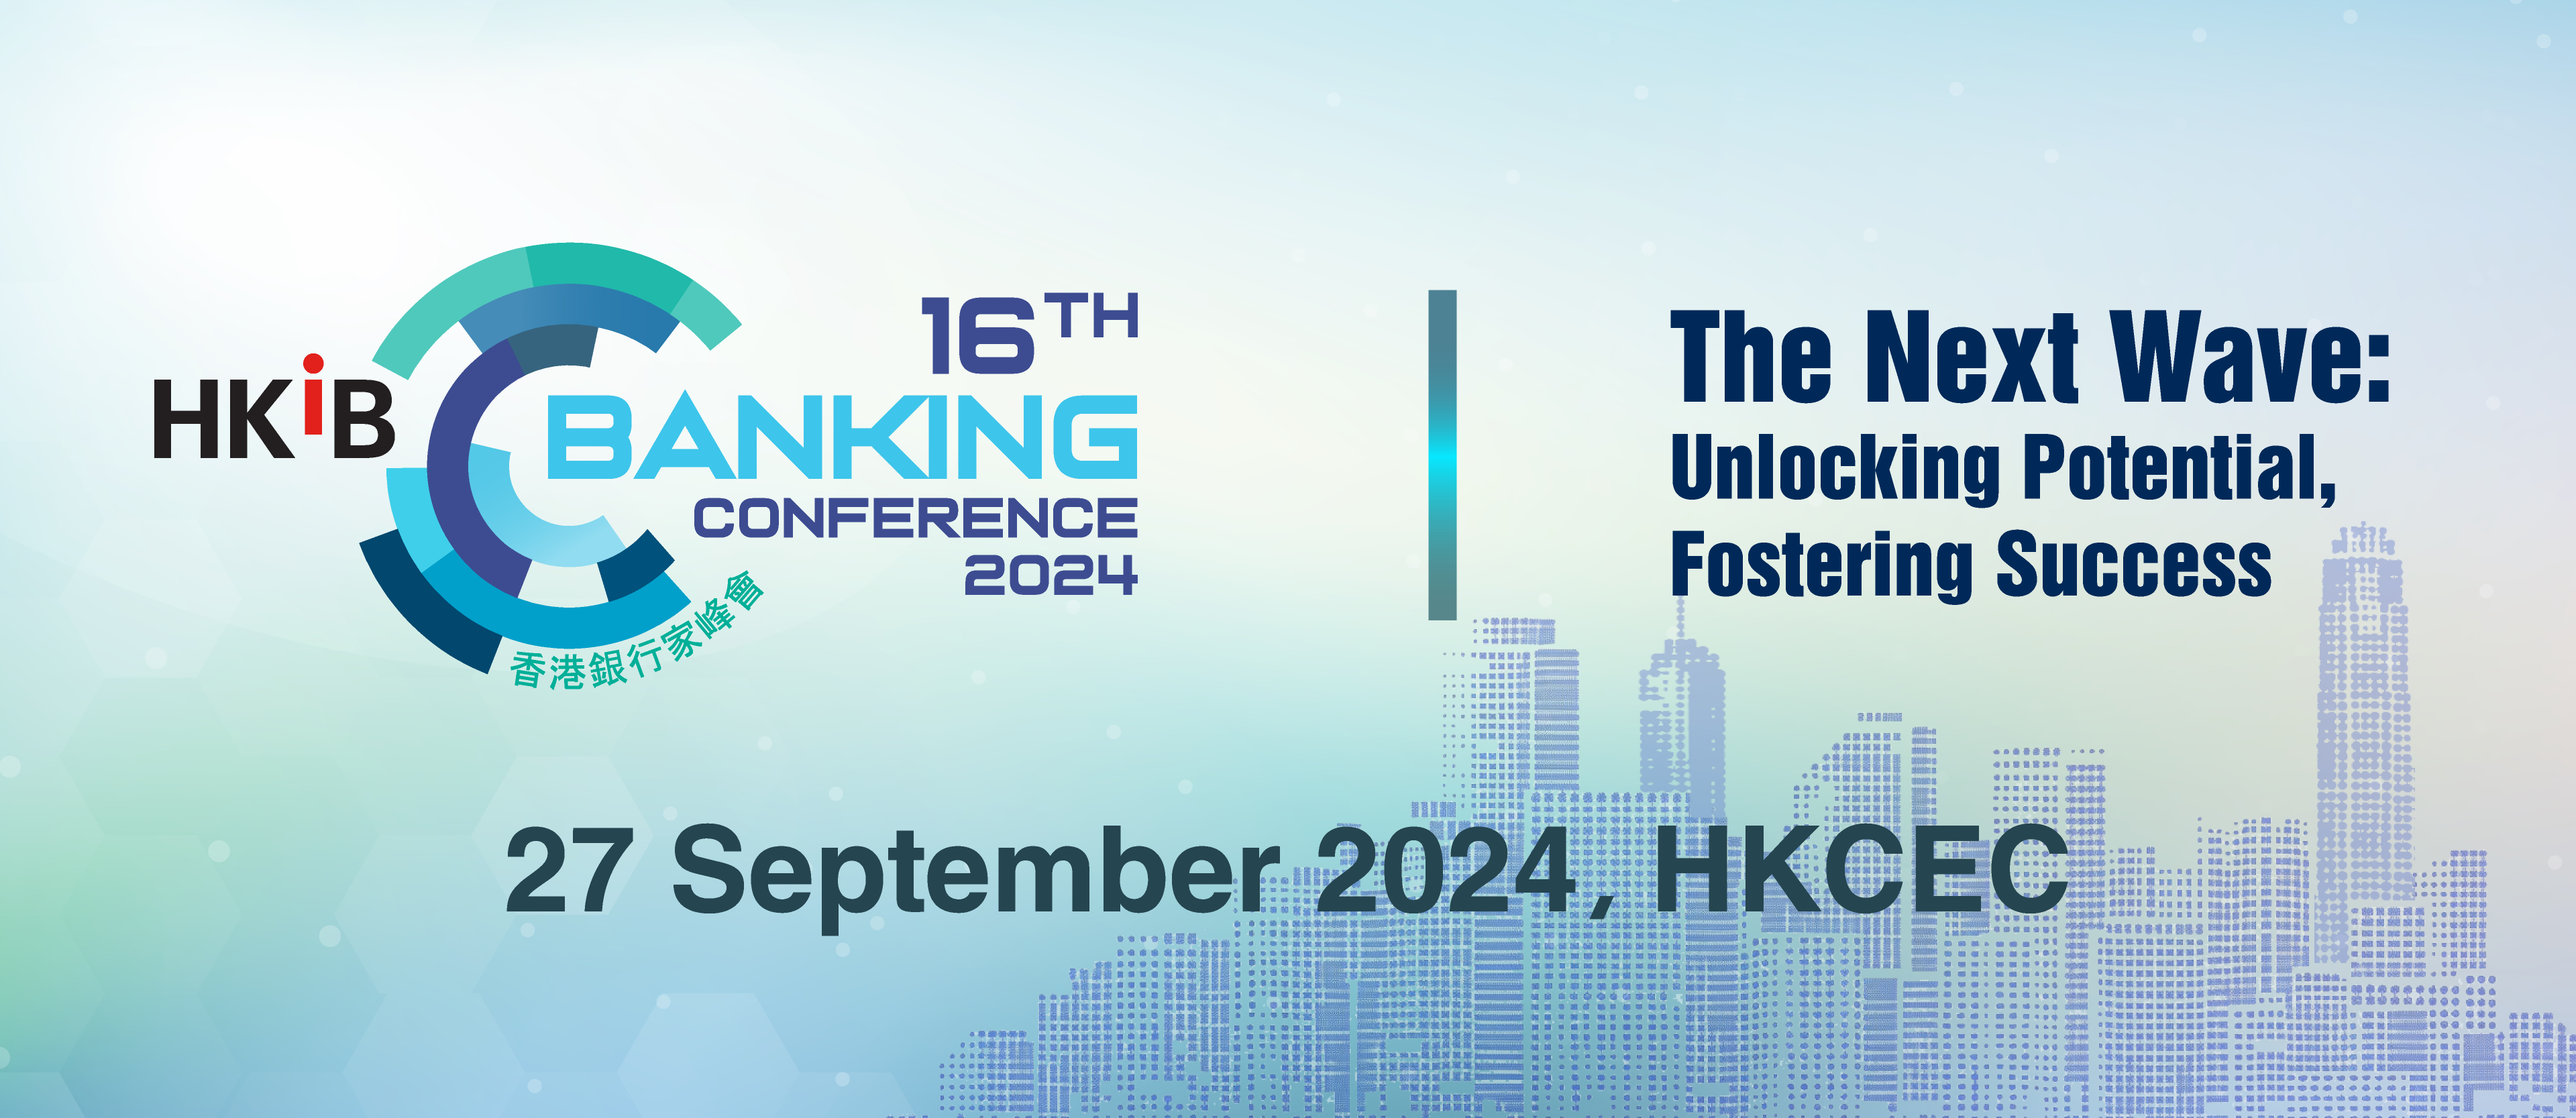 The Hong Kong Institute of Bankers (HKIB) Annual Banking Conference 2024